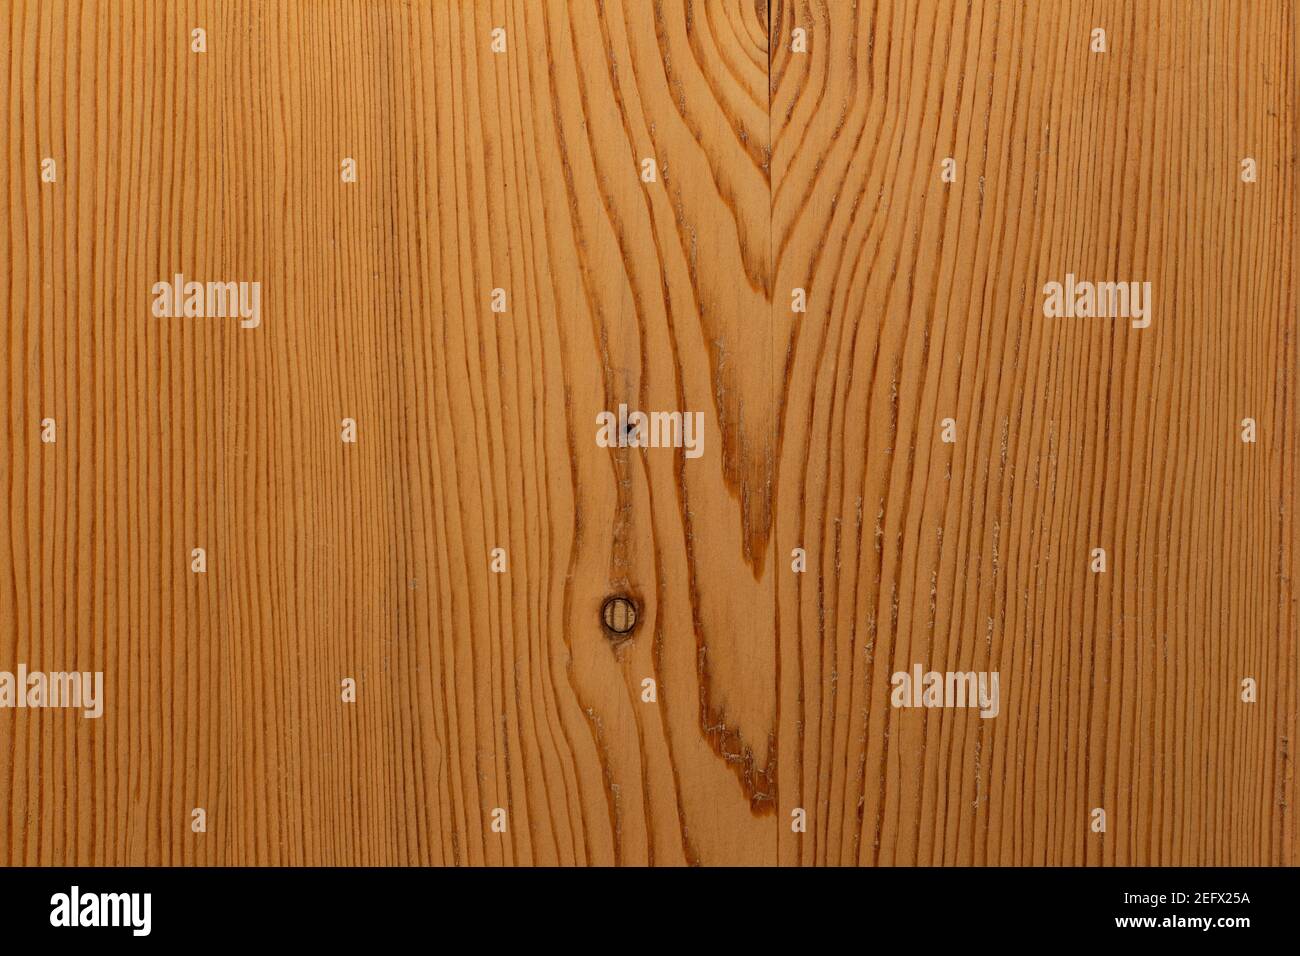 Natural wood texture for background Stock Photo